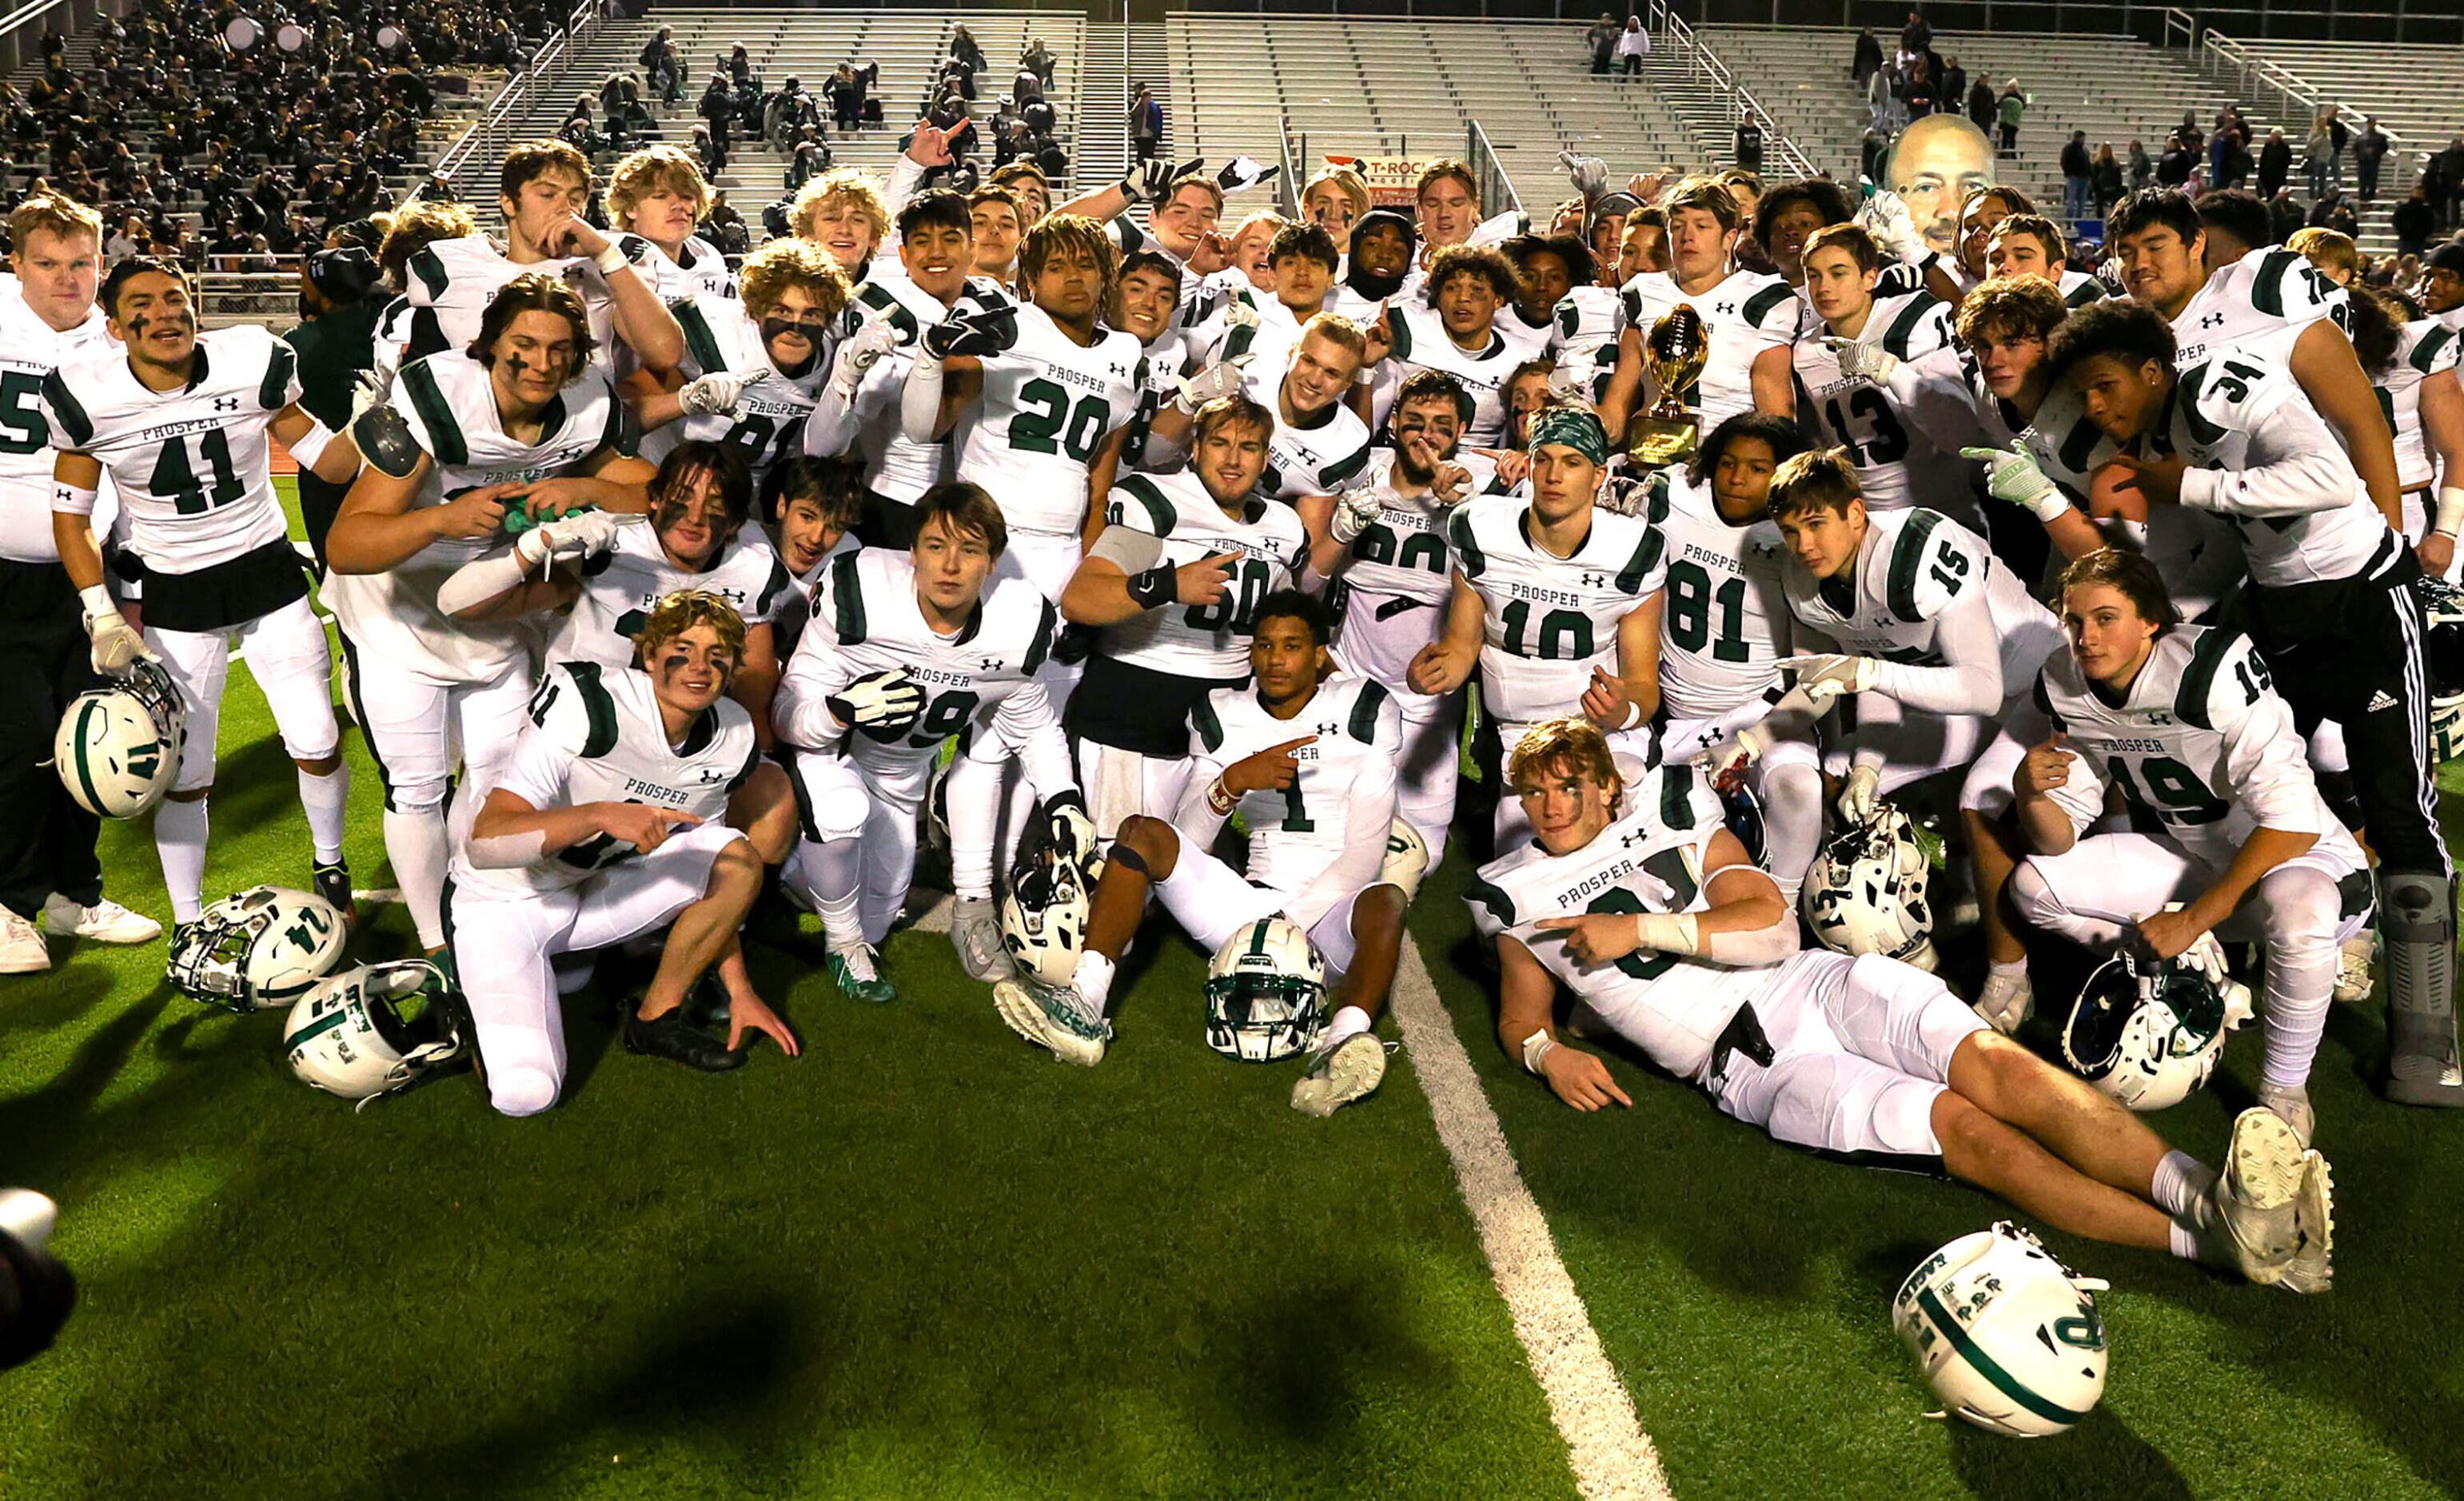 The Prosper Eagles defeat Flower Mound Marcus, 28-21 in overtime of a Class 6A Division II...